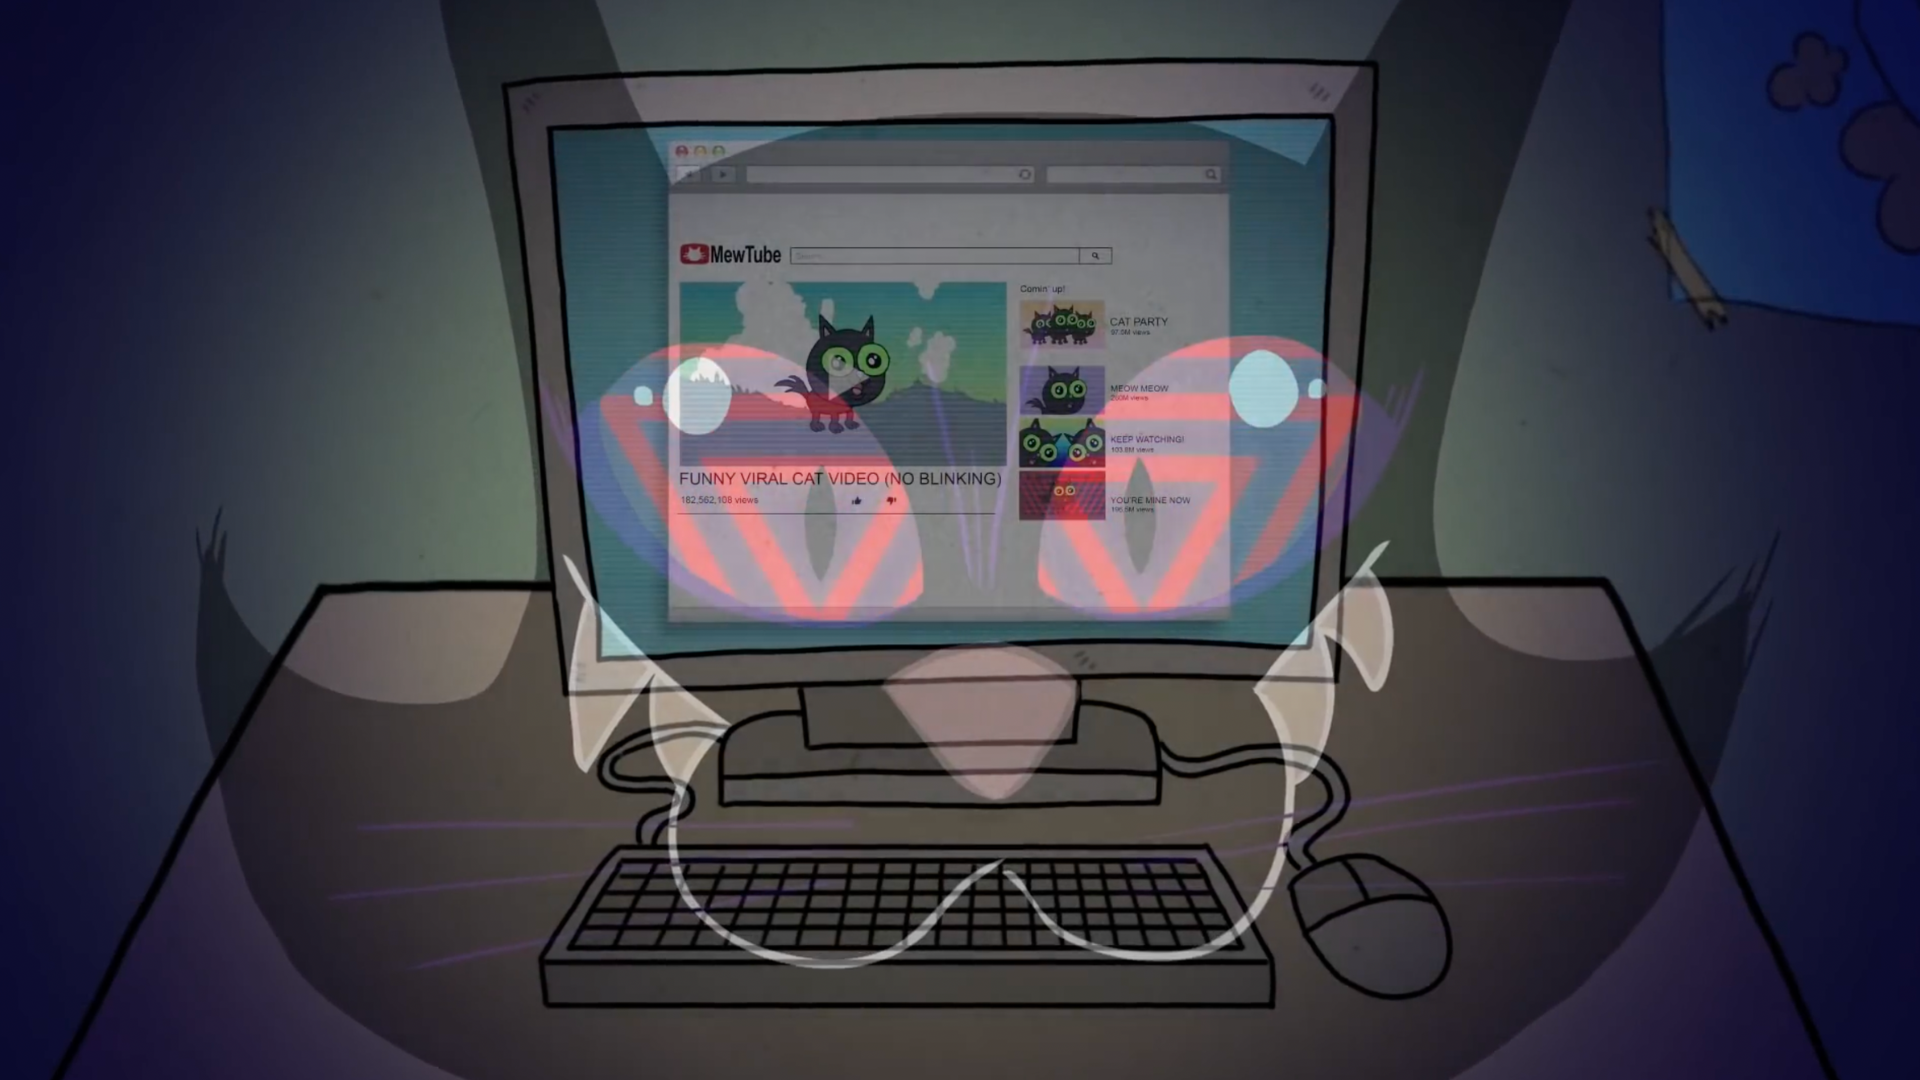 Screenshot from The King of Claws animated music video by The Stolen Moans